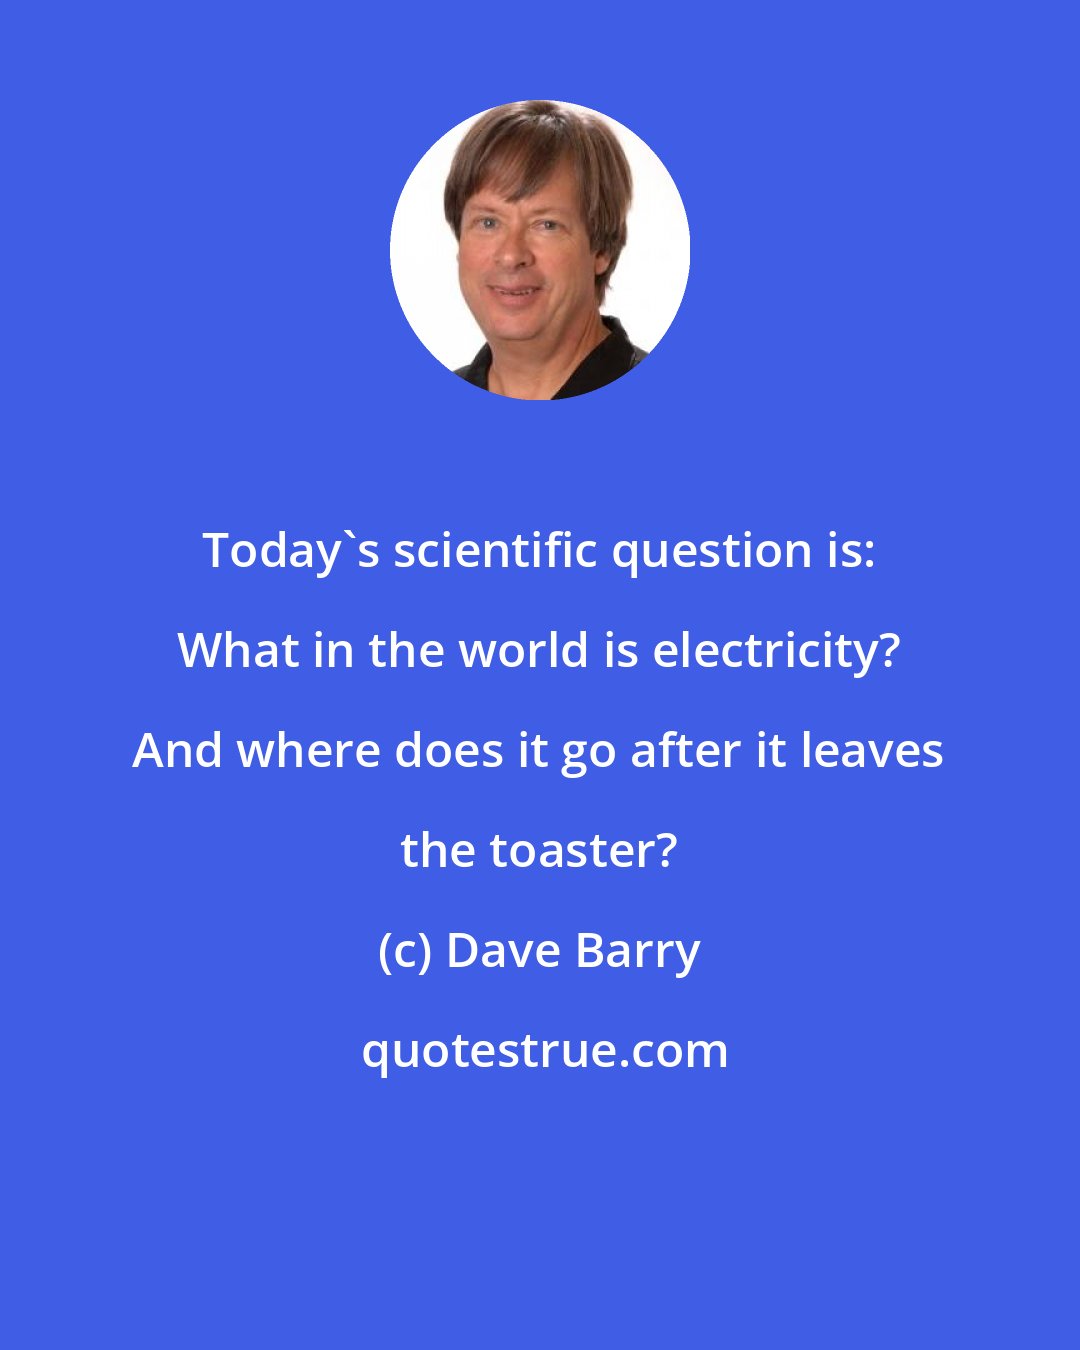 Dave Barry: Today's scientific question is: What in the world is electricity? And where does it go after it leaves the toaster?